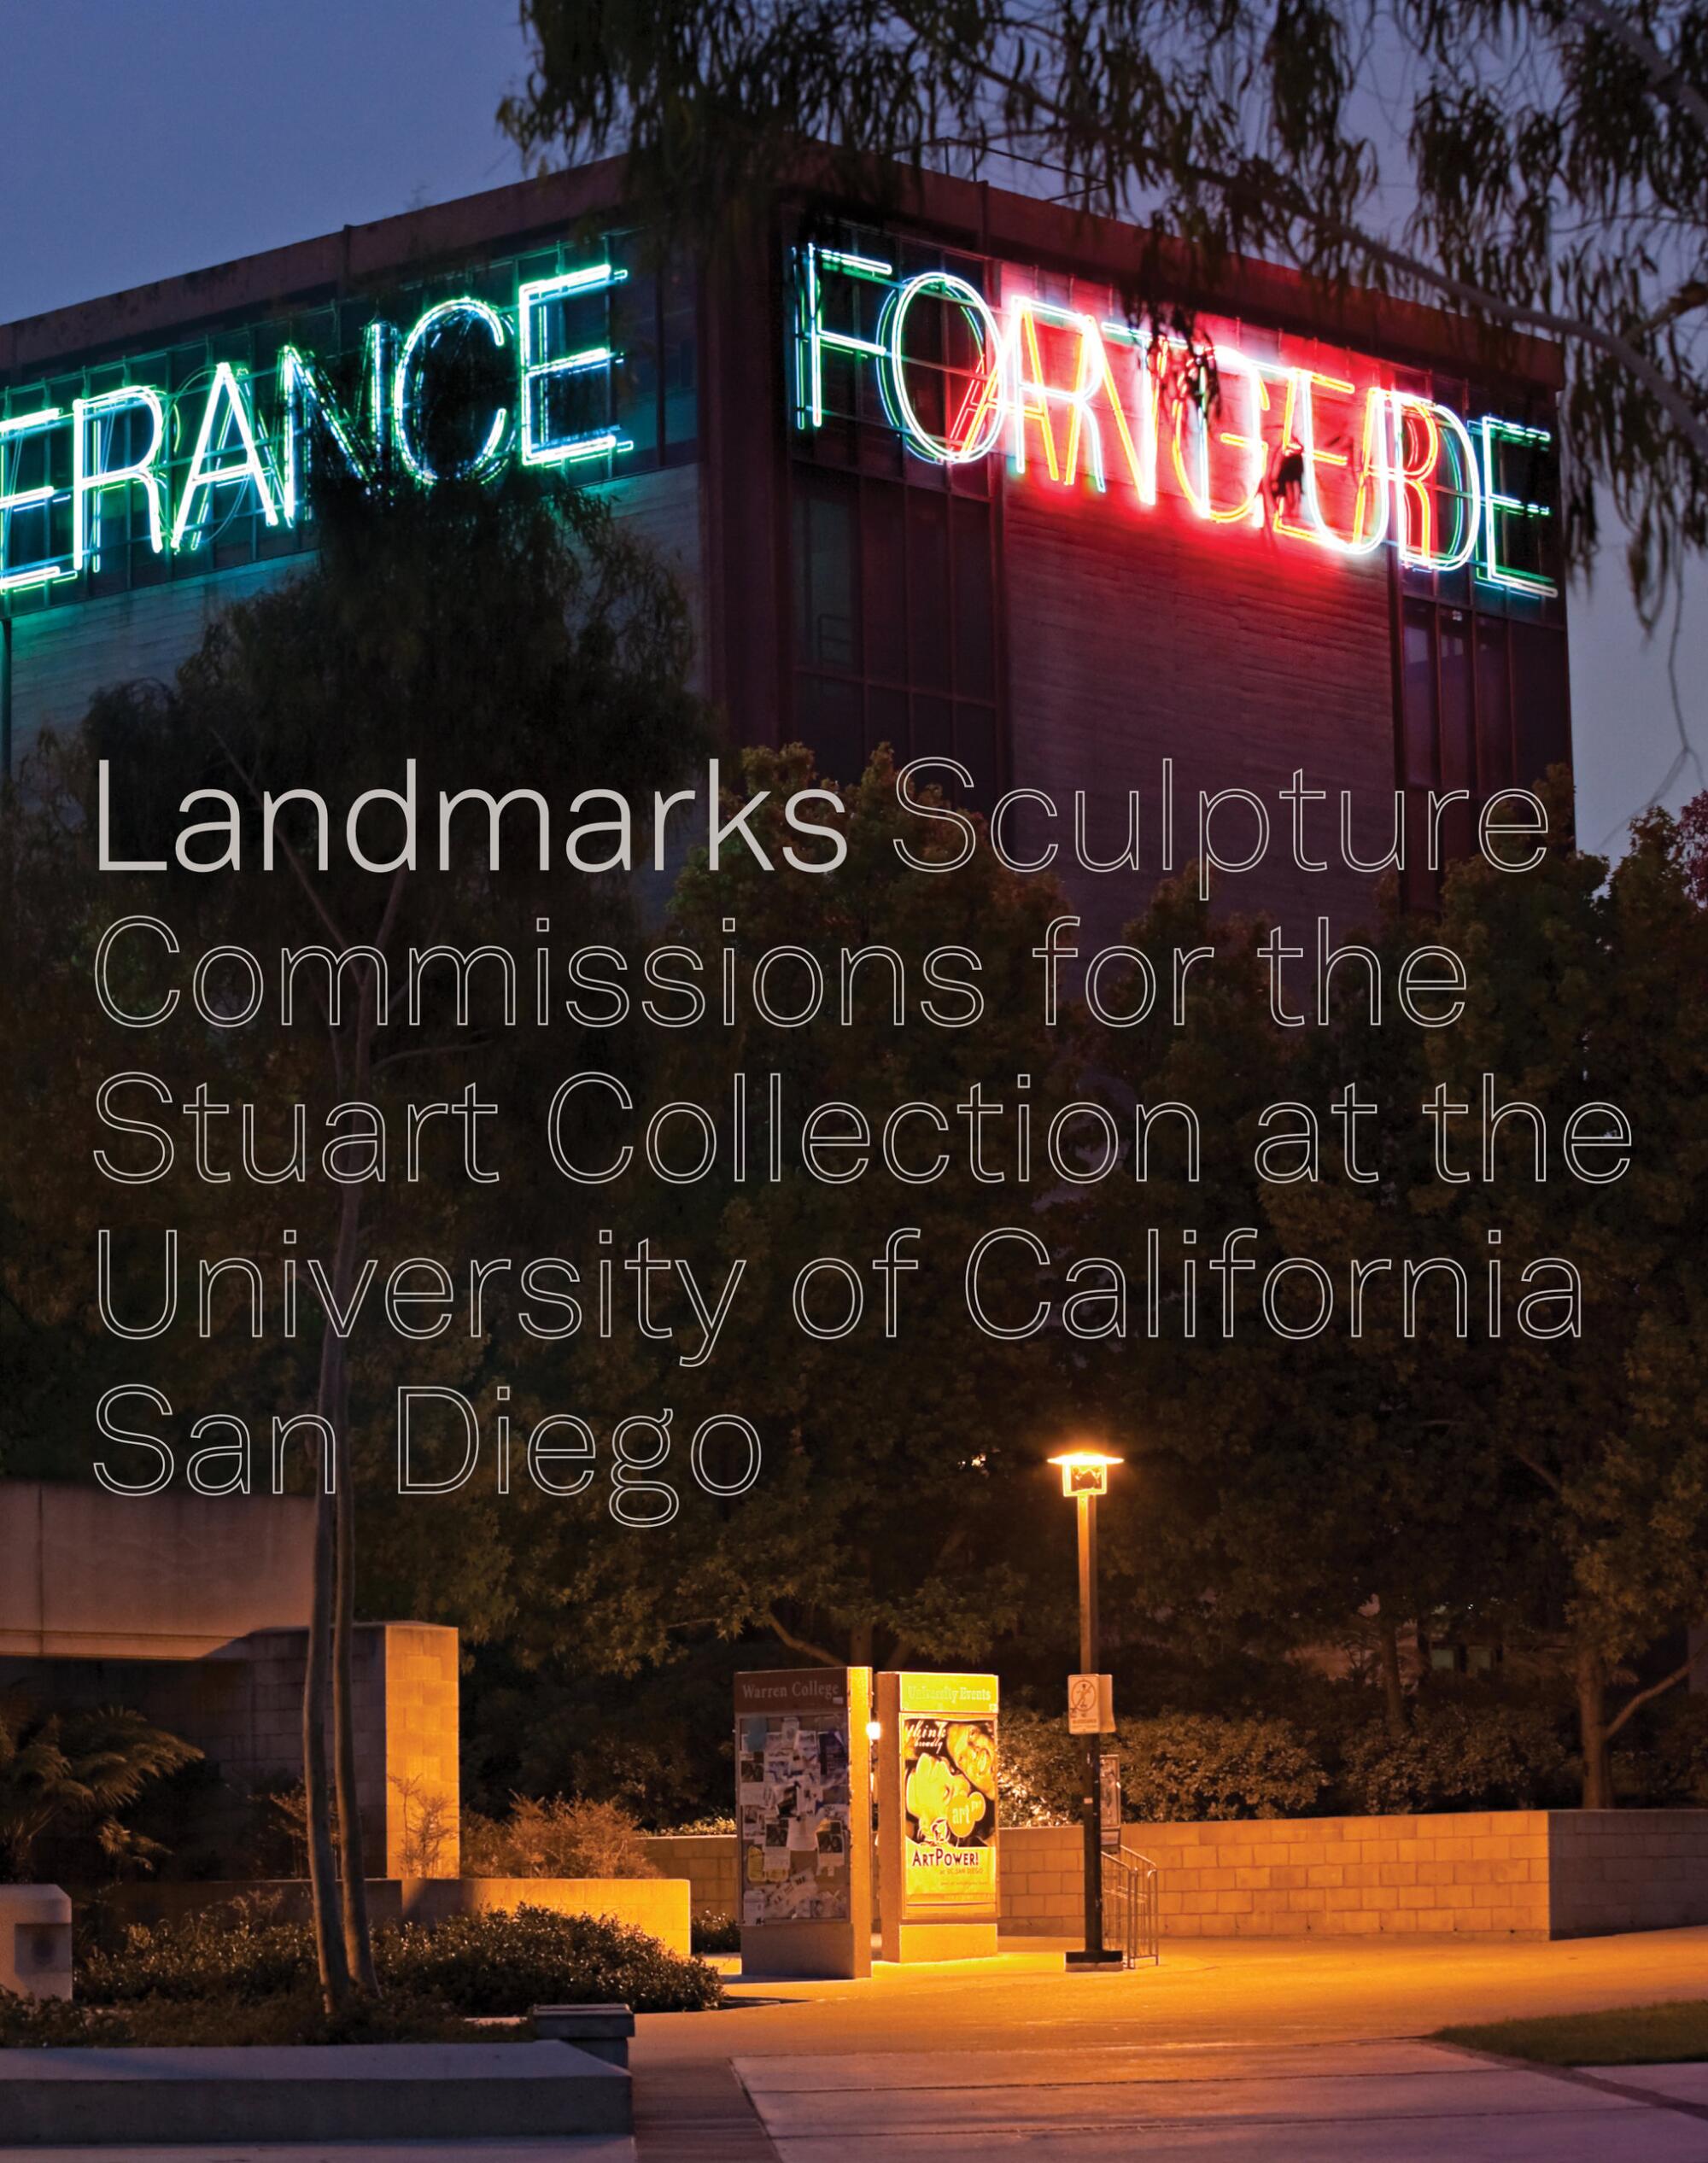 Mary L. Beebe, "Landmarks: Sculpture Commissions for the Stuart Collection at the University of California San Diego"